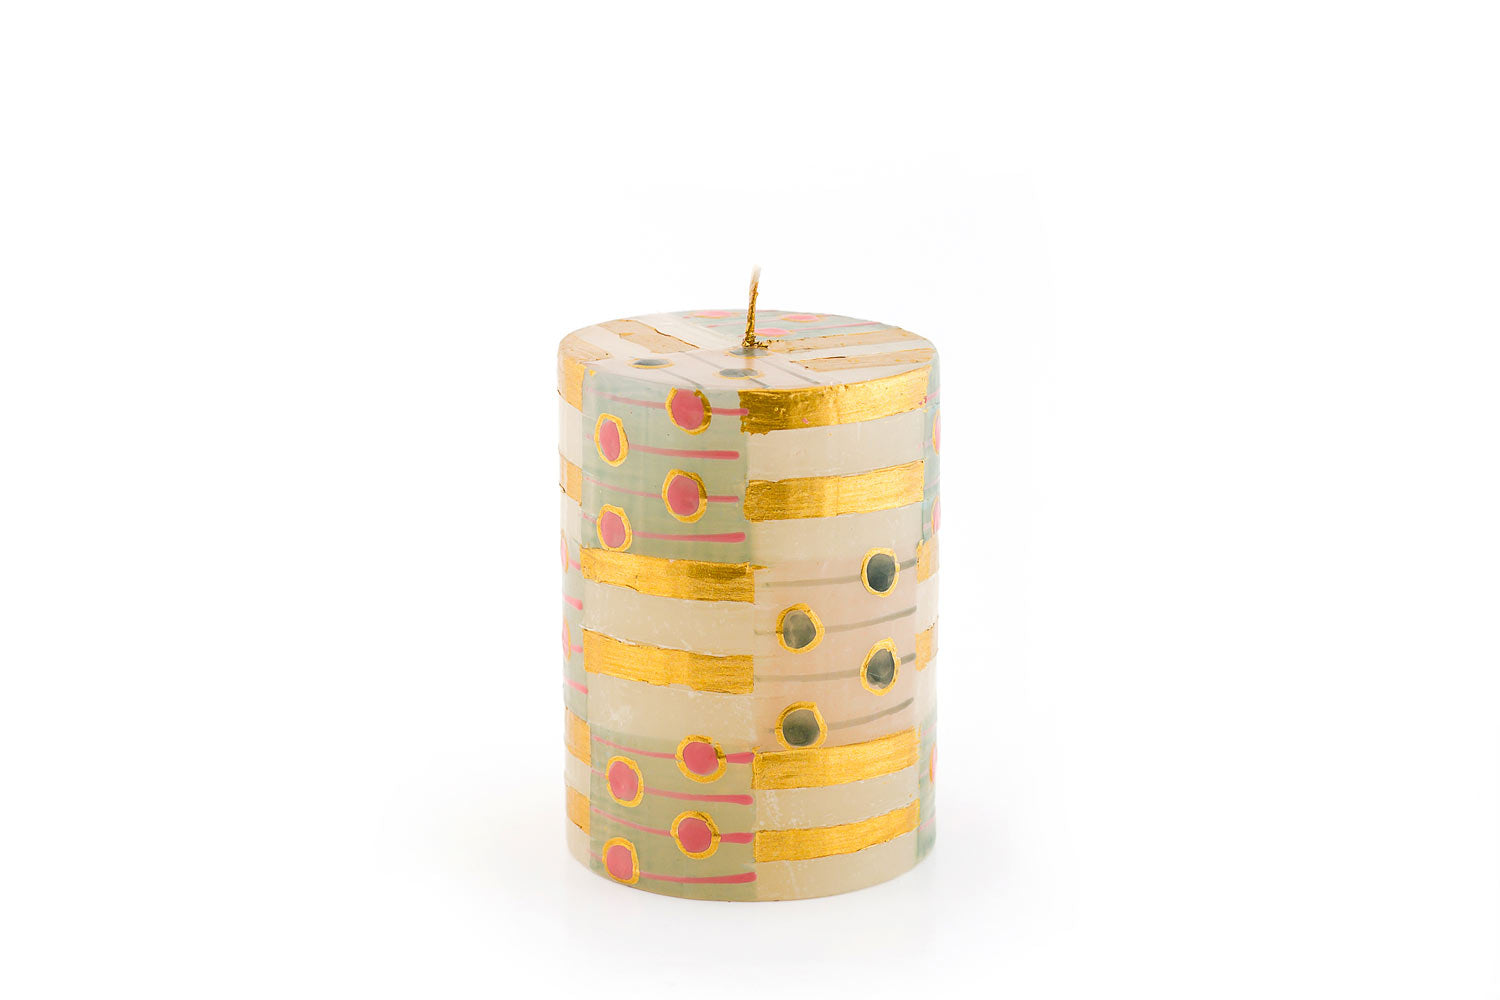 Delight 3x4inch pillar cube.  Cream background with gold stripes, and pink & turquoise dots.  Hand painted. Fair trade.